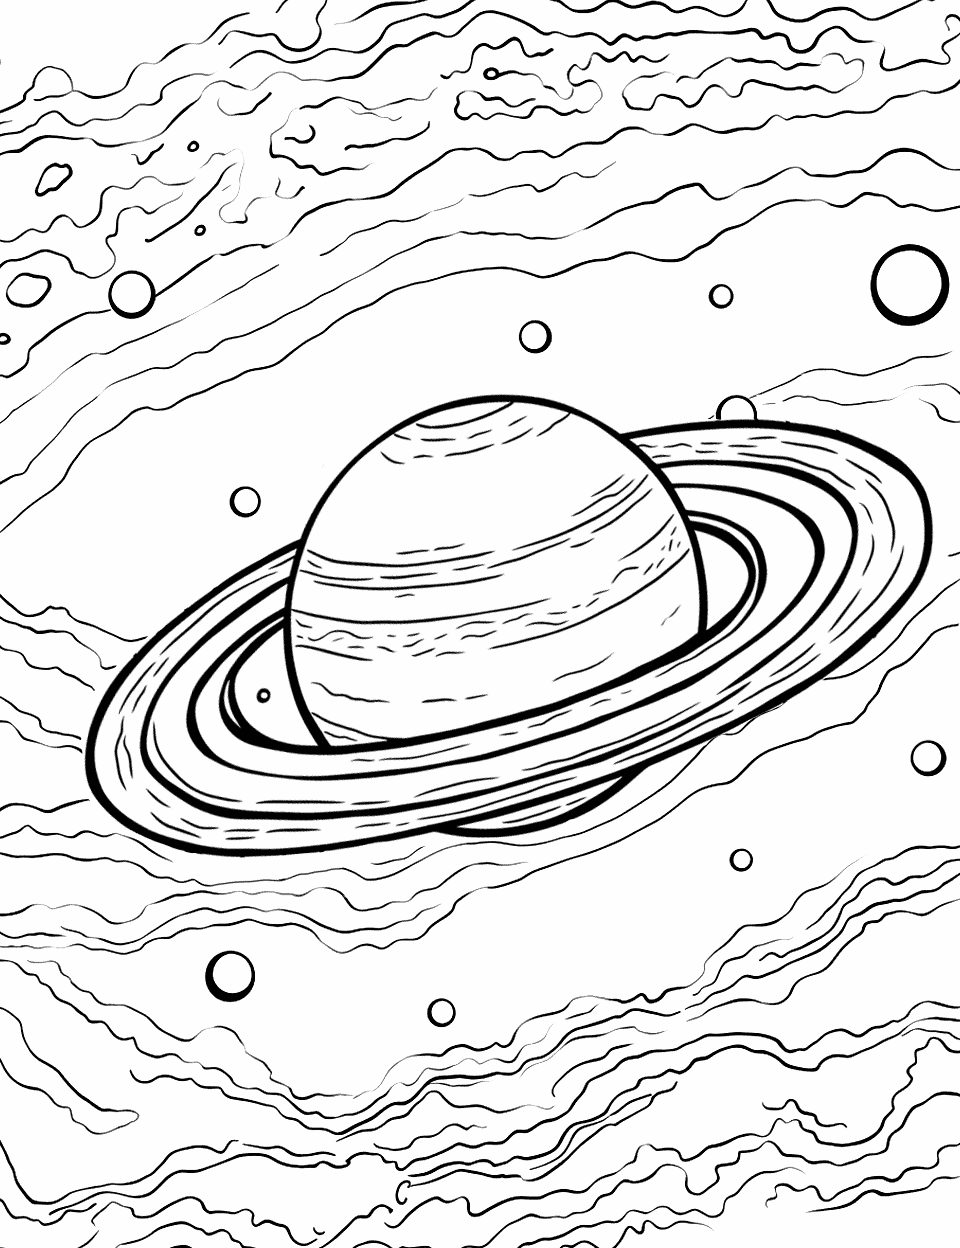 Jupiter's Great Red Spot Solar System Coloring Page - Jupiter with its swirling Great Red Spot and surrounding clouds.